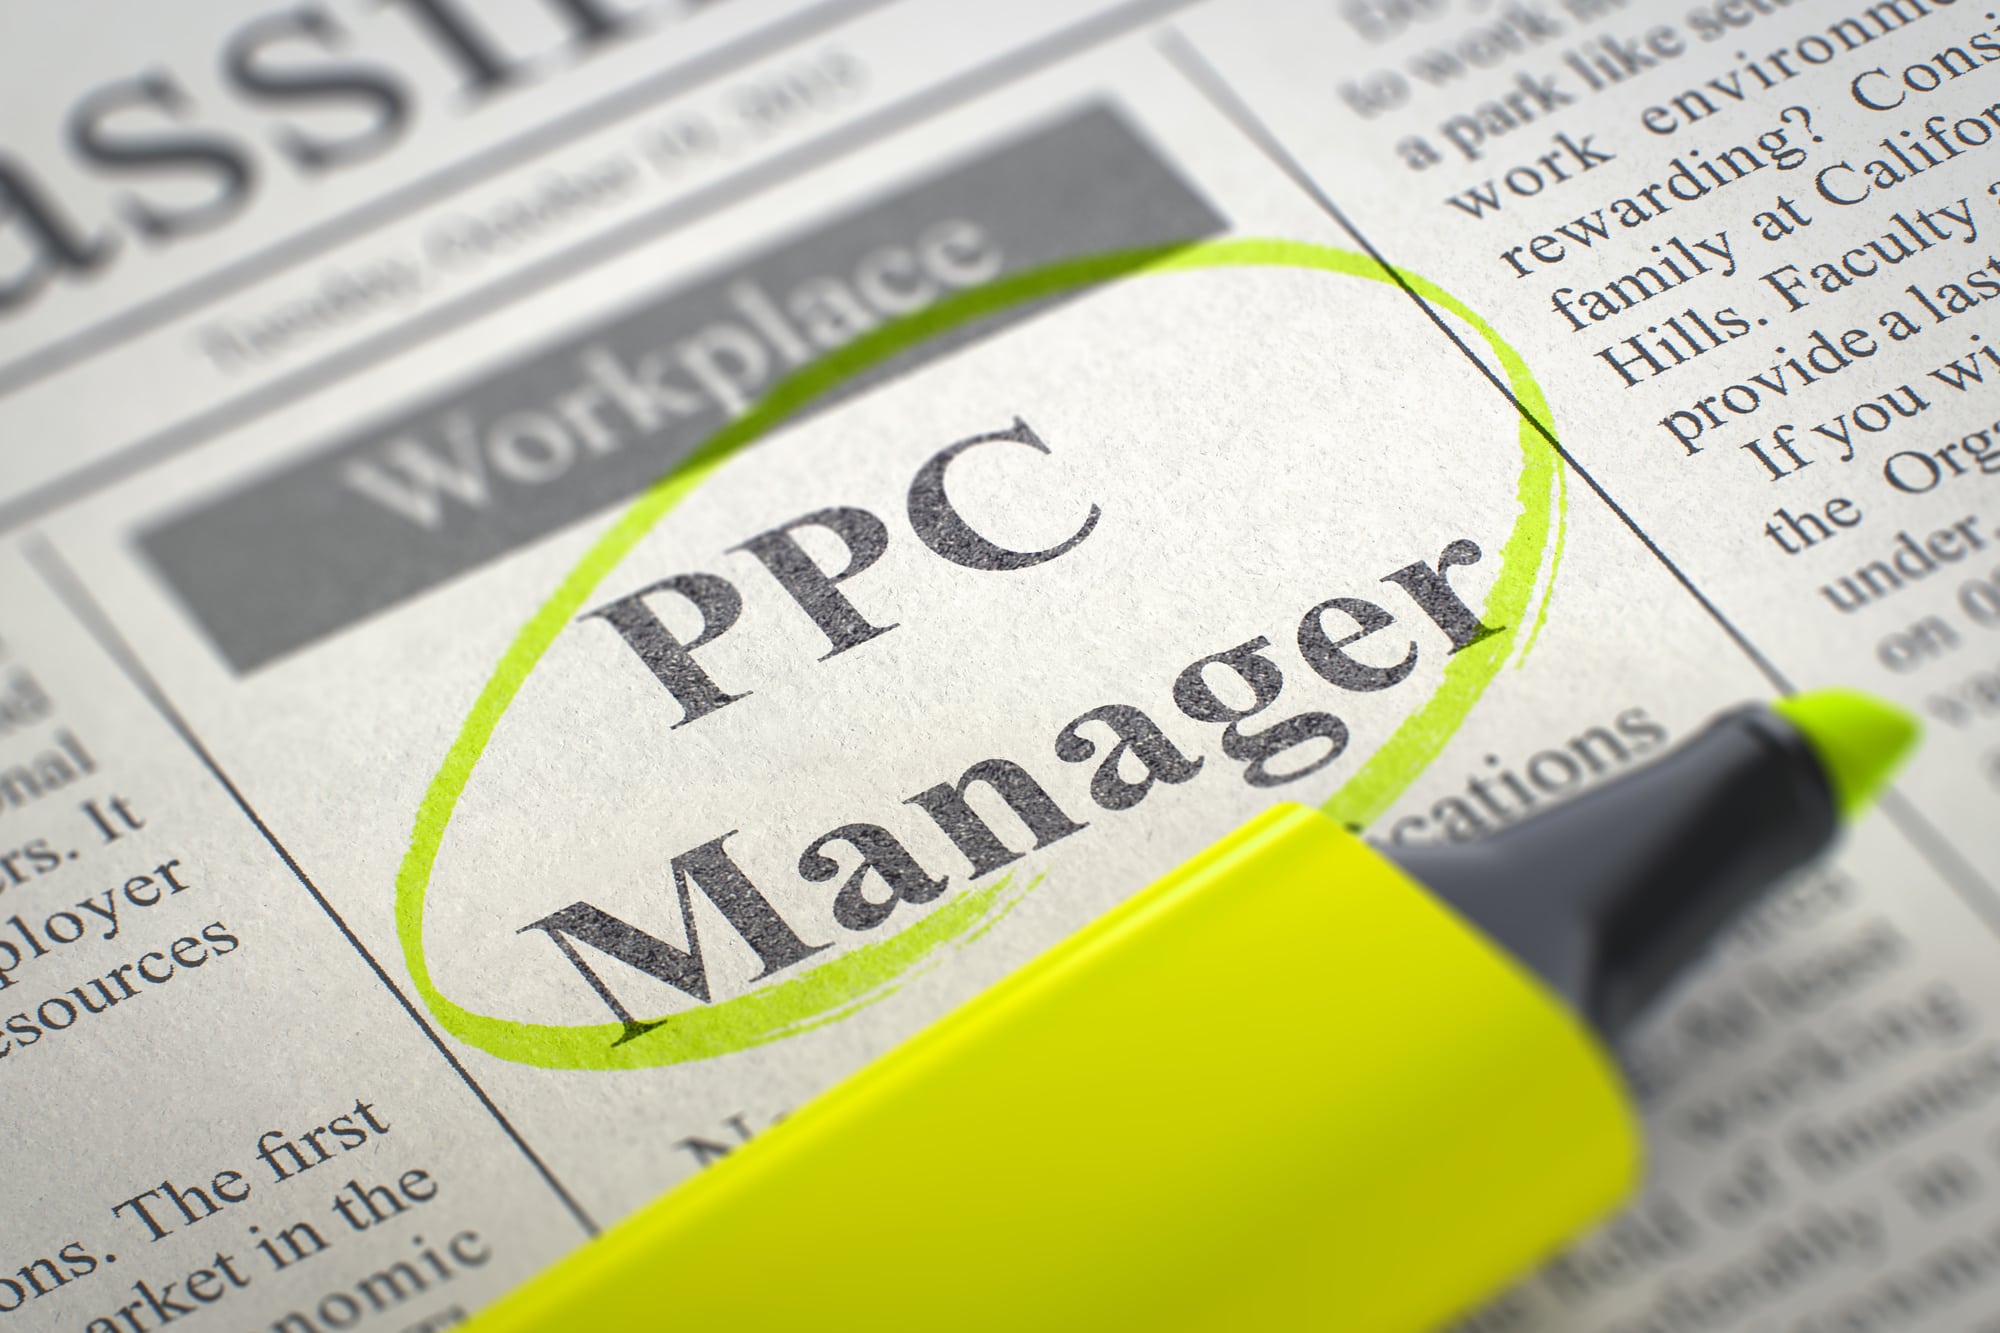 PPC Manager Employment Ad in Newspaper